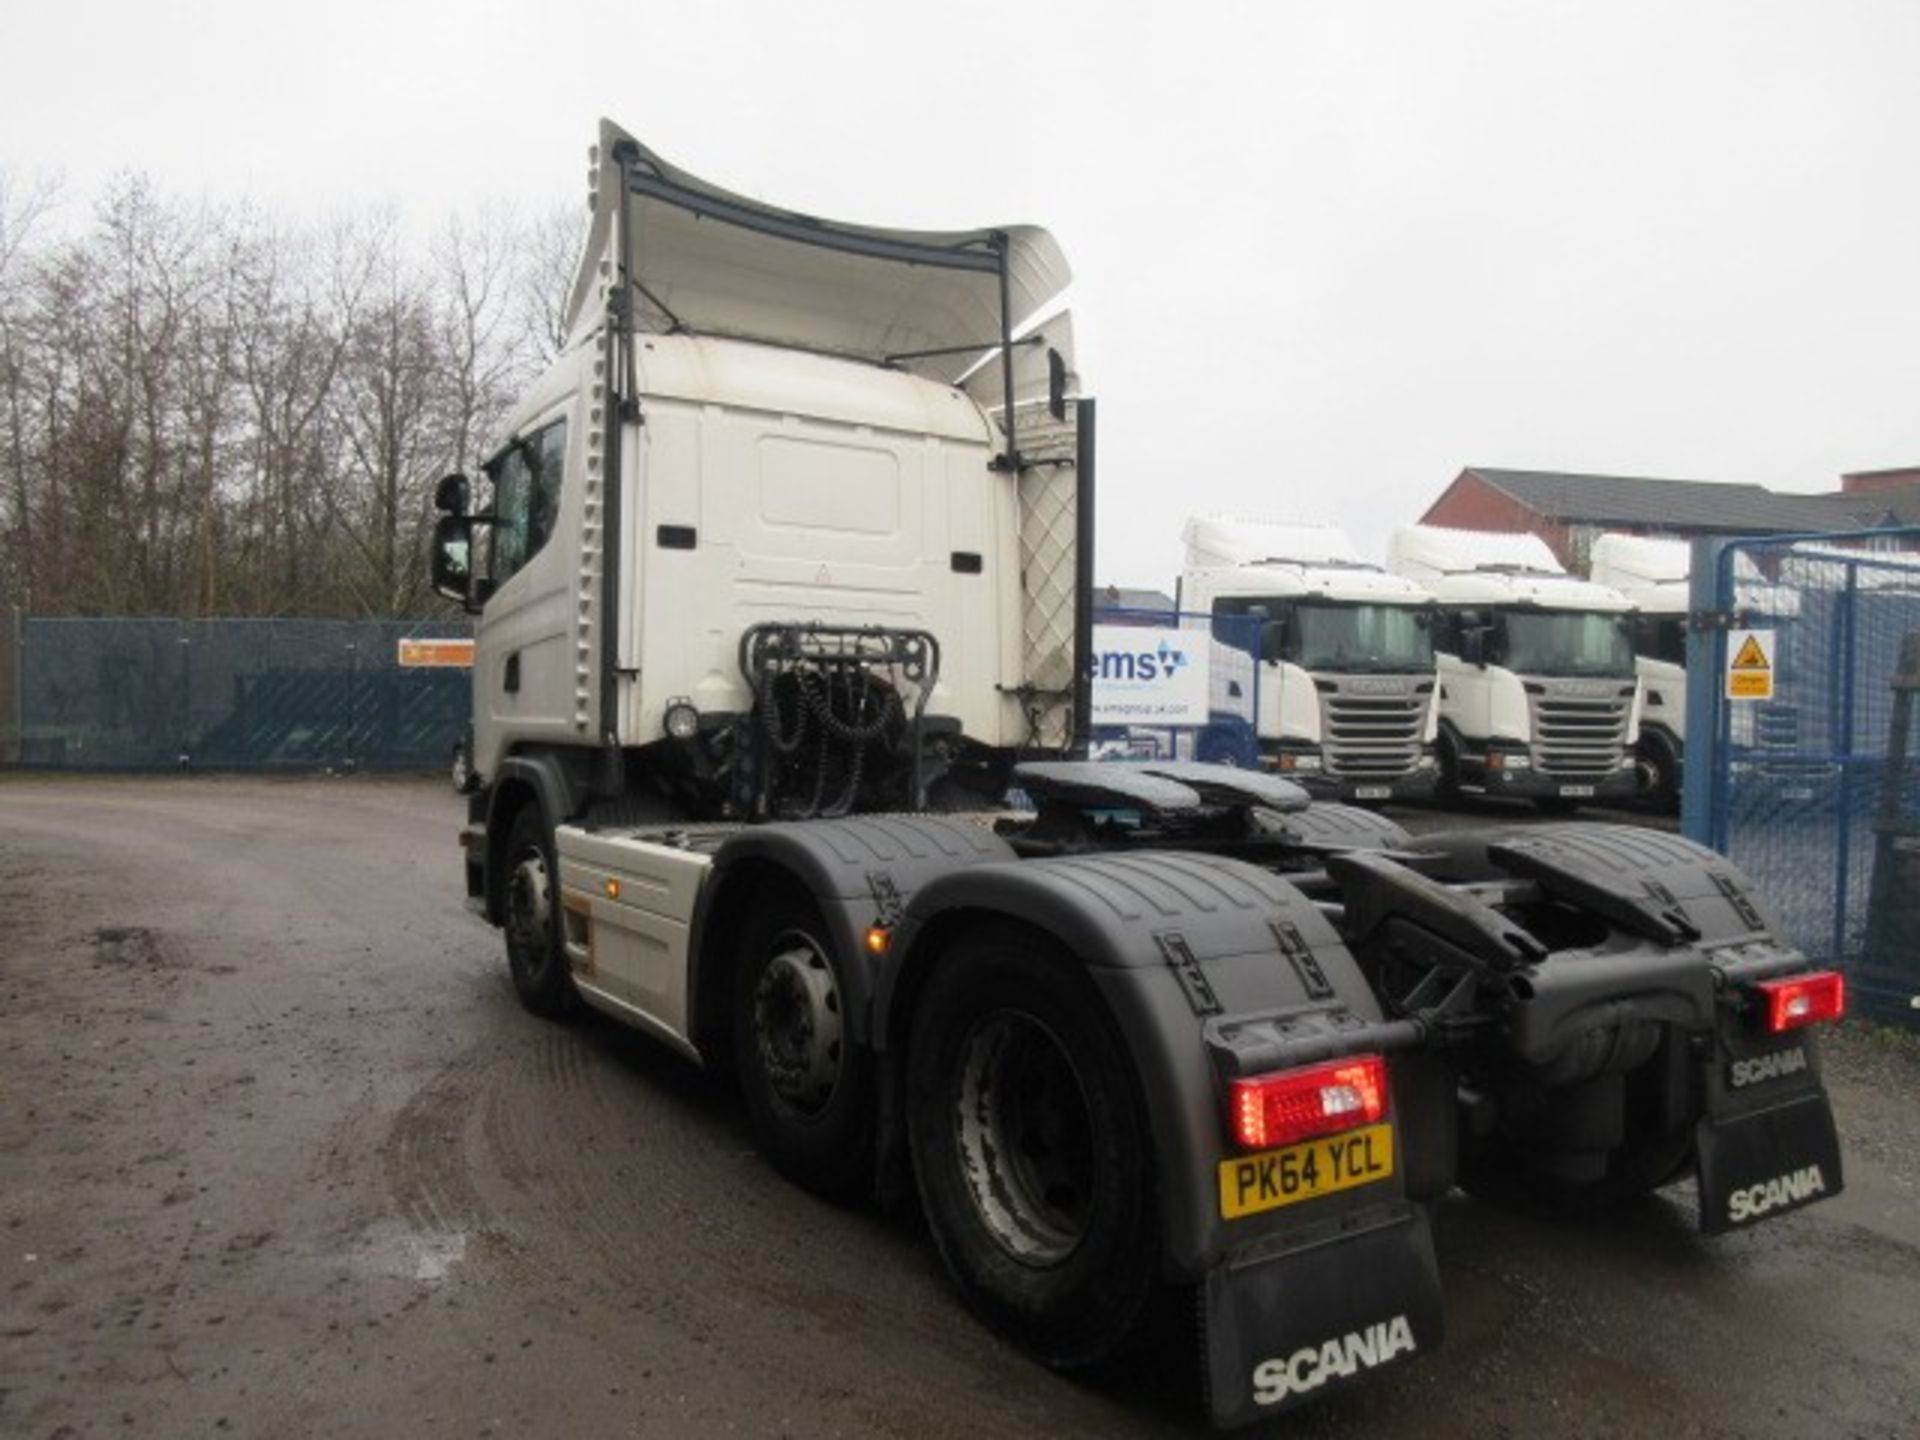 Scania G410 LA6x2/2MNA tractor unit, 2014, '64' PK64 YCL - LOCATED IN WIGAN - Image 4 of 10